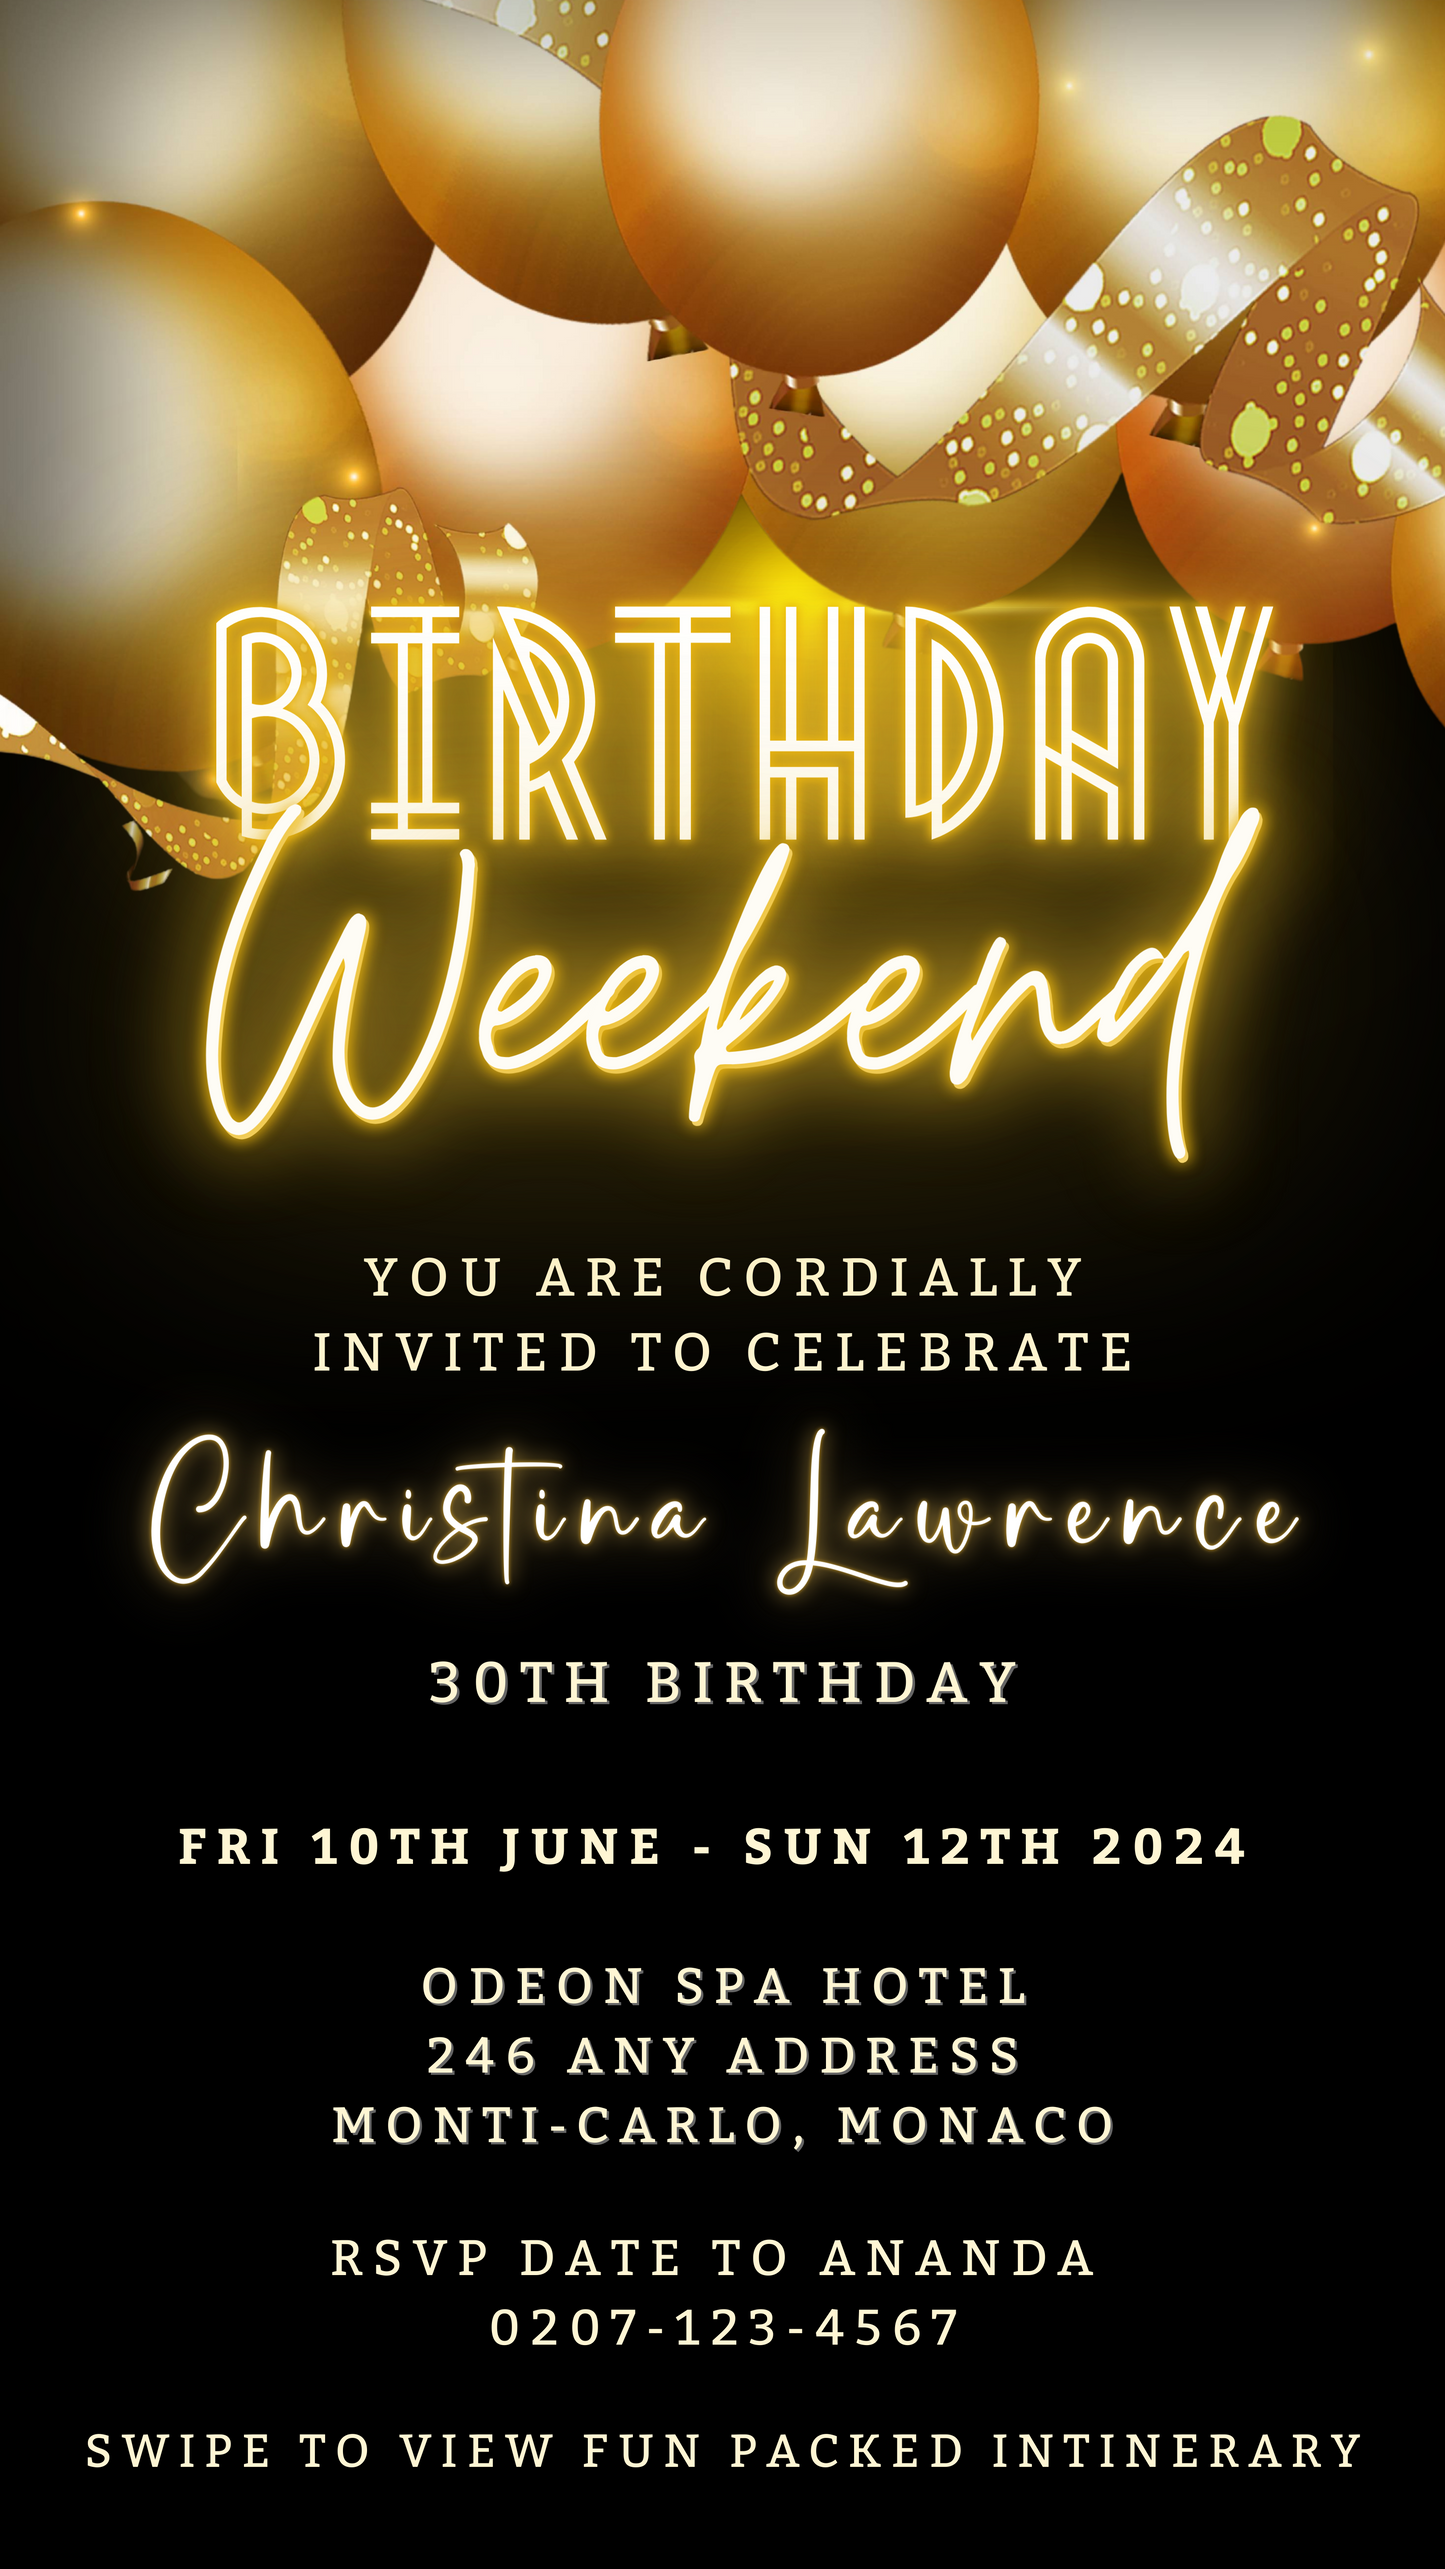 Black Neon Gold Balloons | Birthday Weekend Evite featuring customizable text and graphics, balloons, and ribbons in a digital format for easy personalization and electronic sharing.